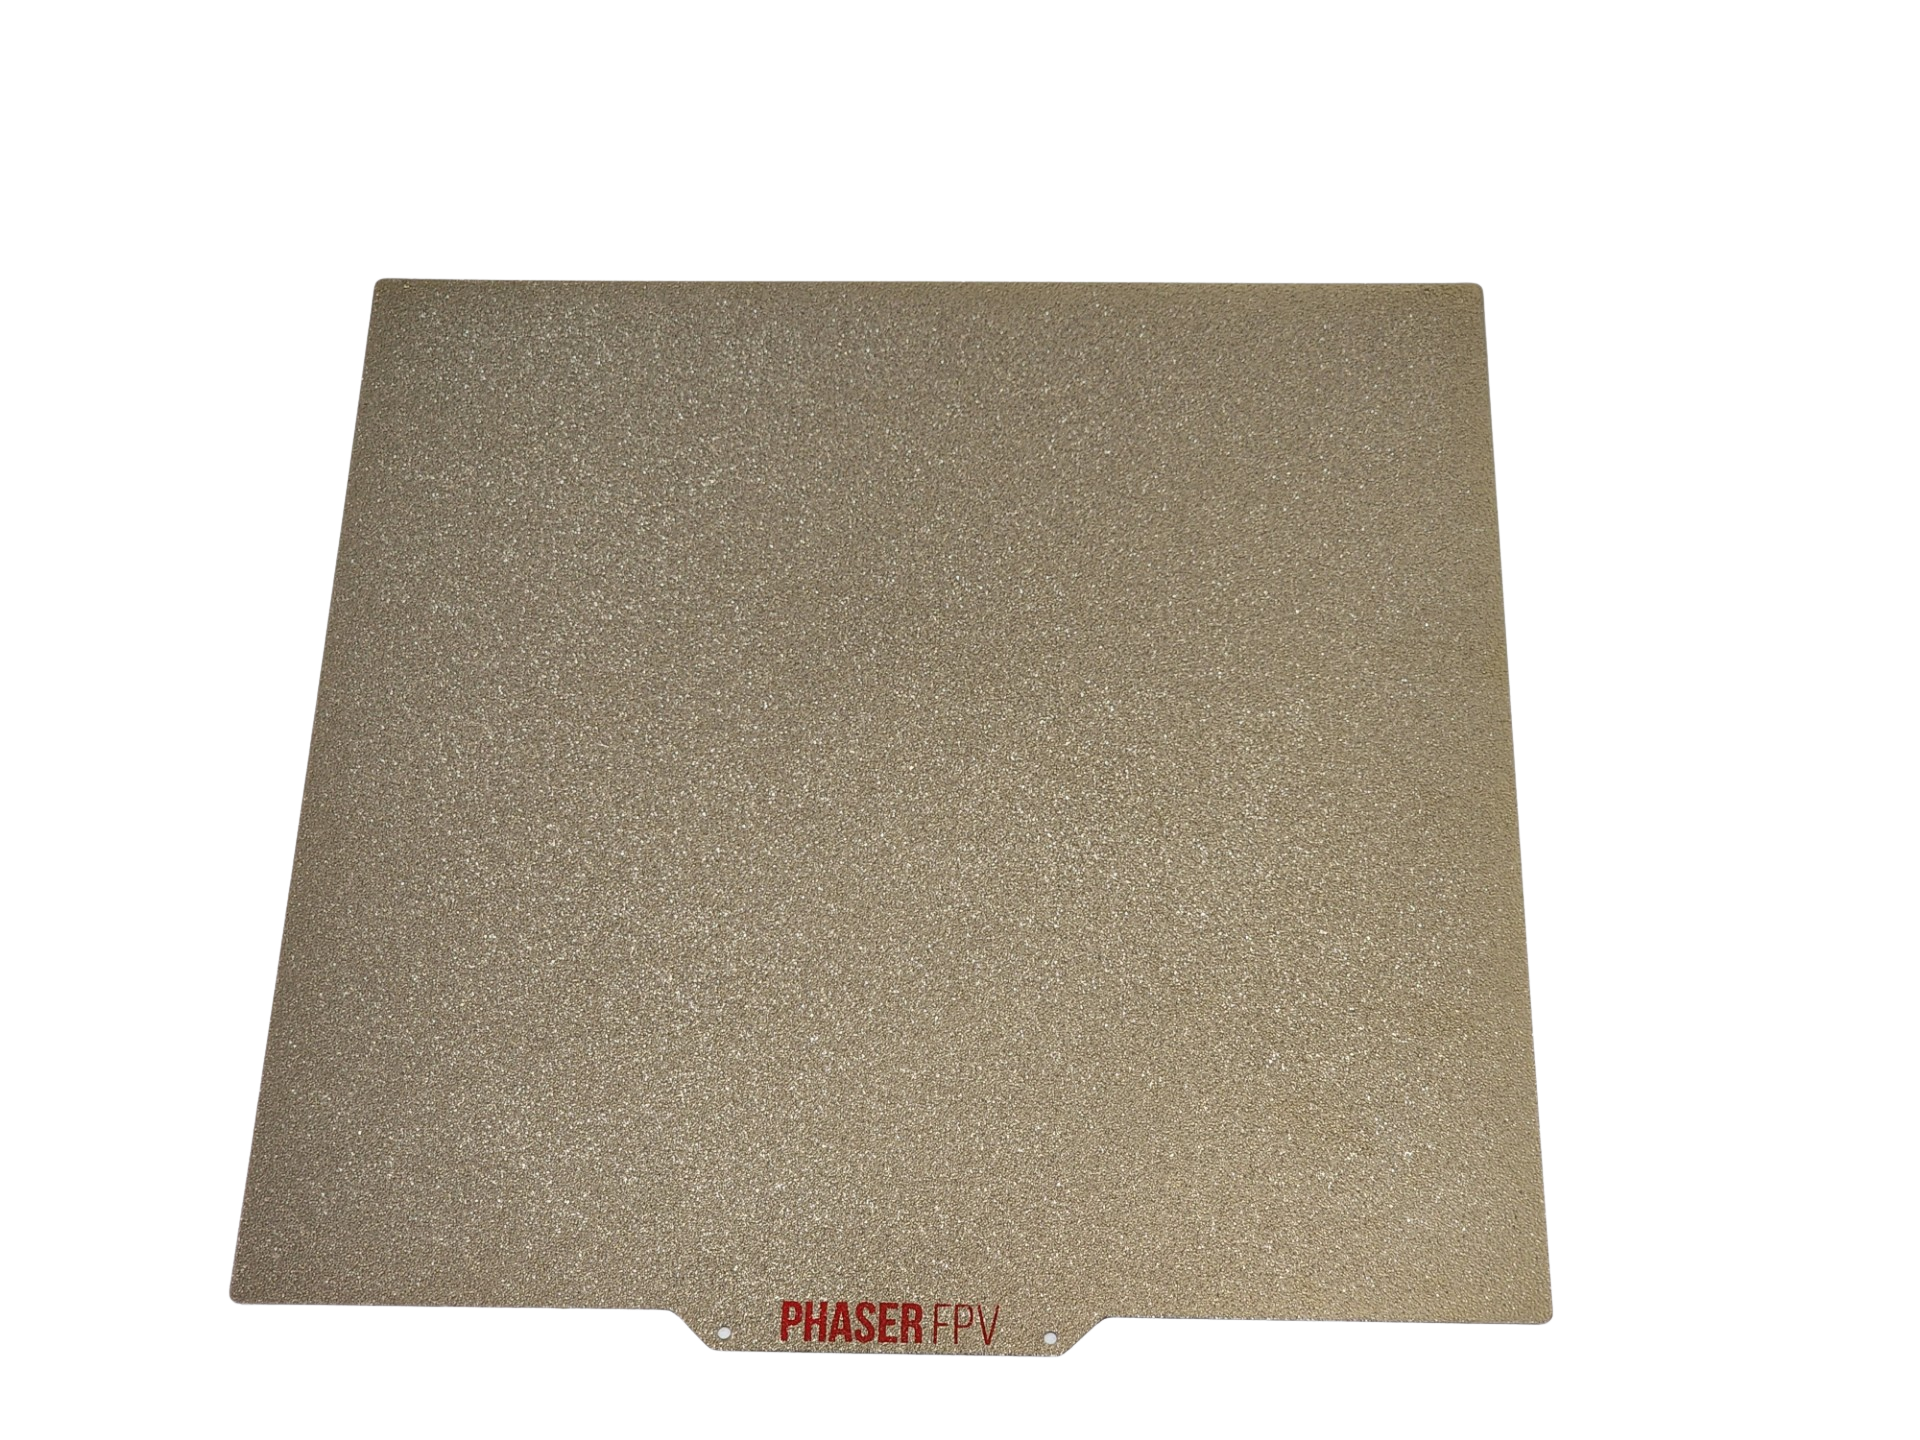 Energetic 410x410mm DOUBLE SIDED Smooth PEI/Textured Gold Spring Steel Sheet (Suits Ratrig)